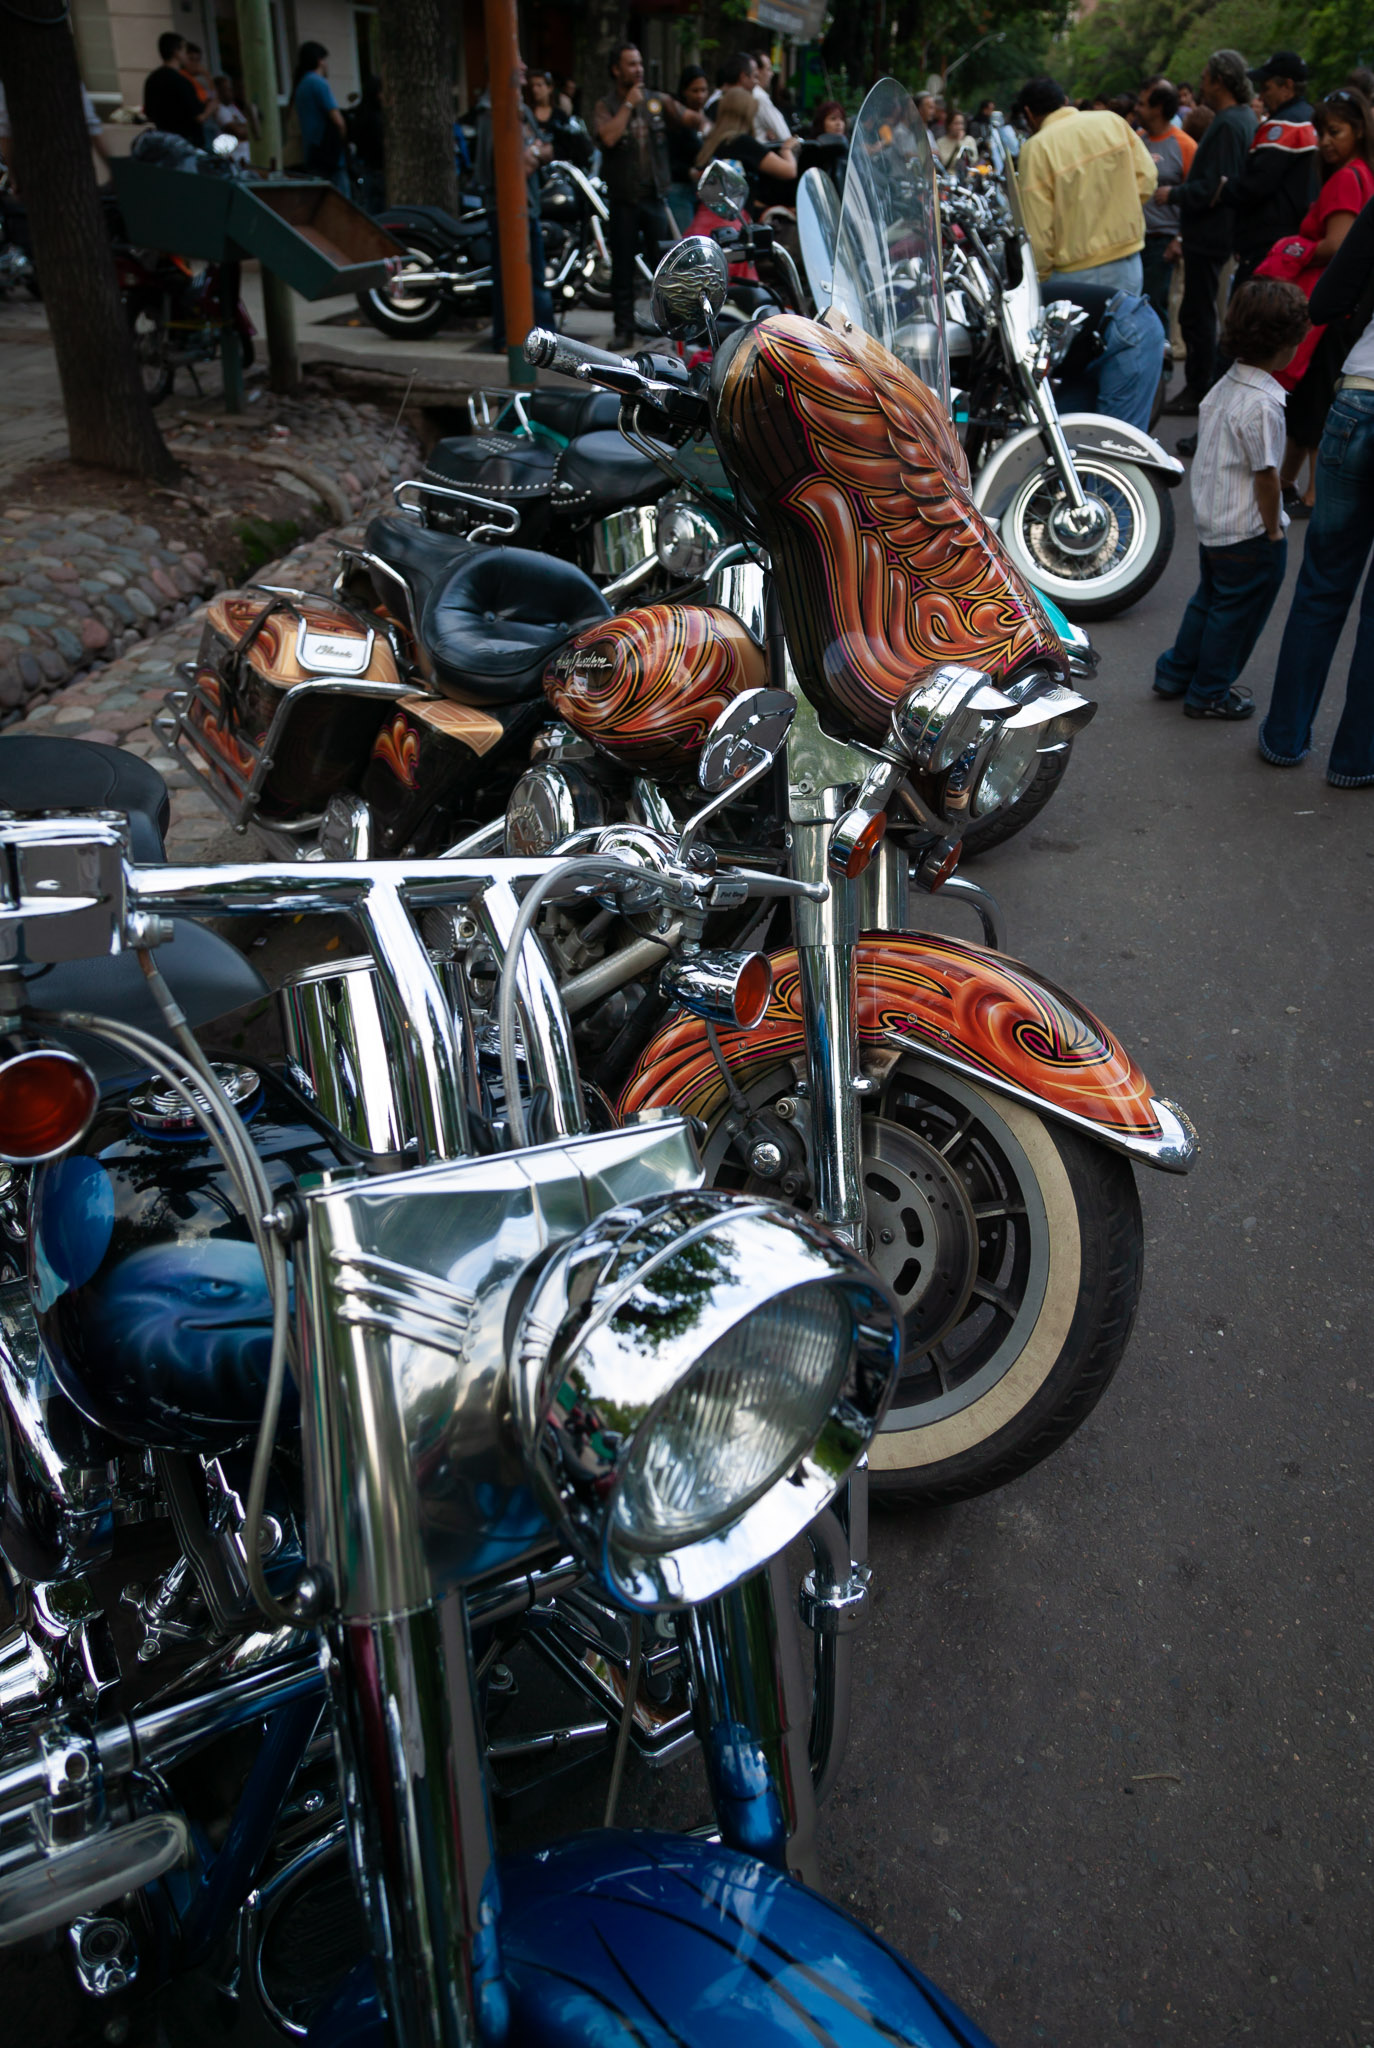 Large Harley Davidson rally weekend, bikers came from all over the Americas